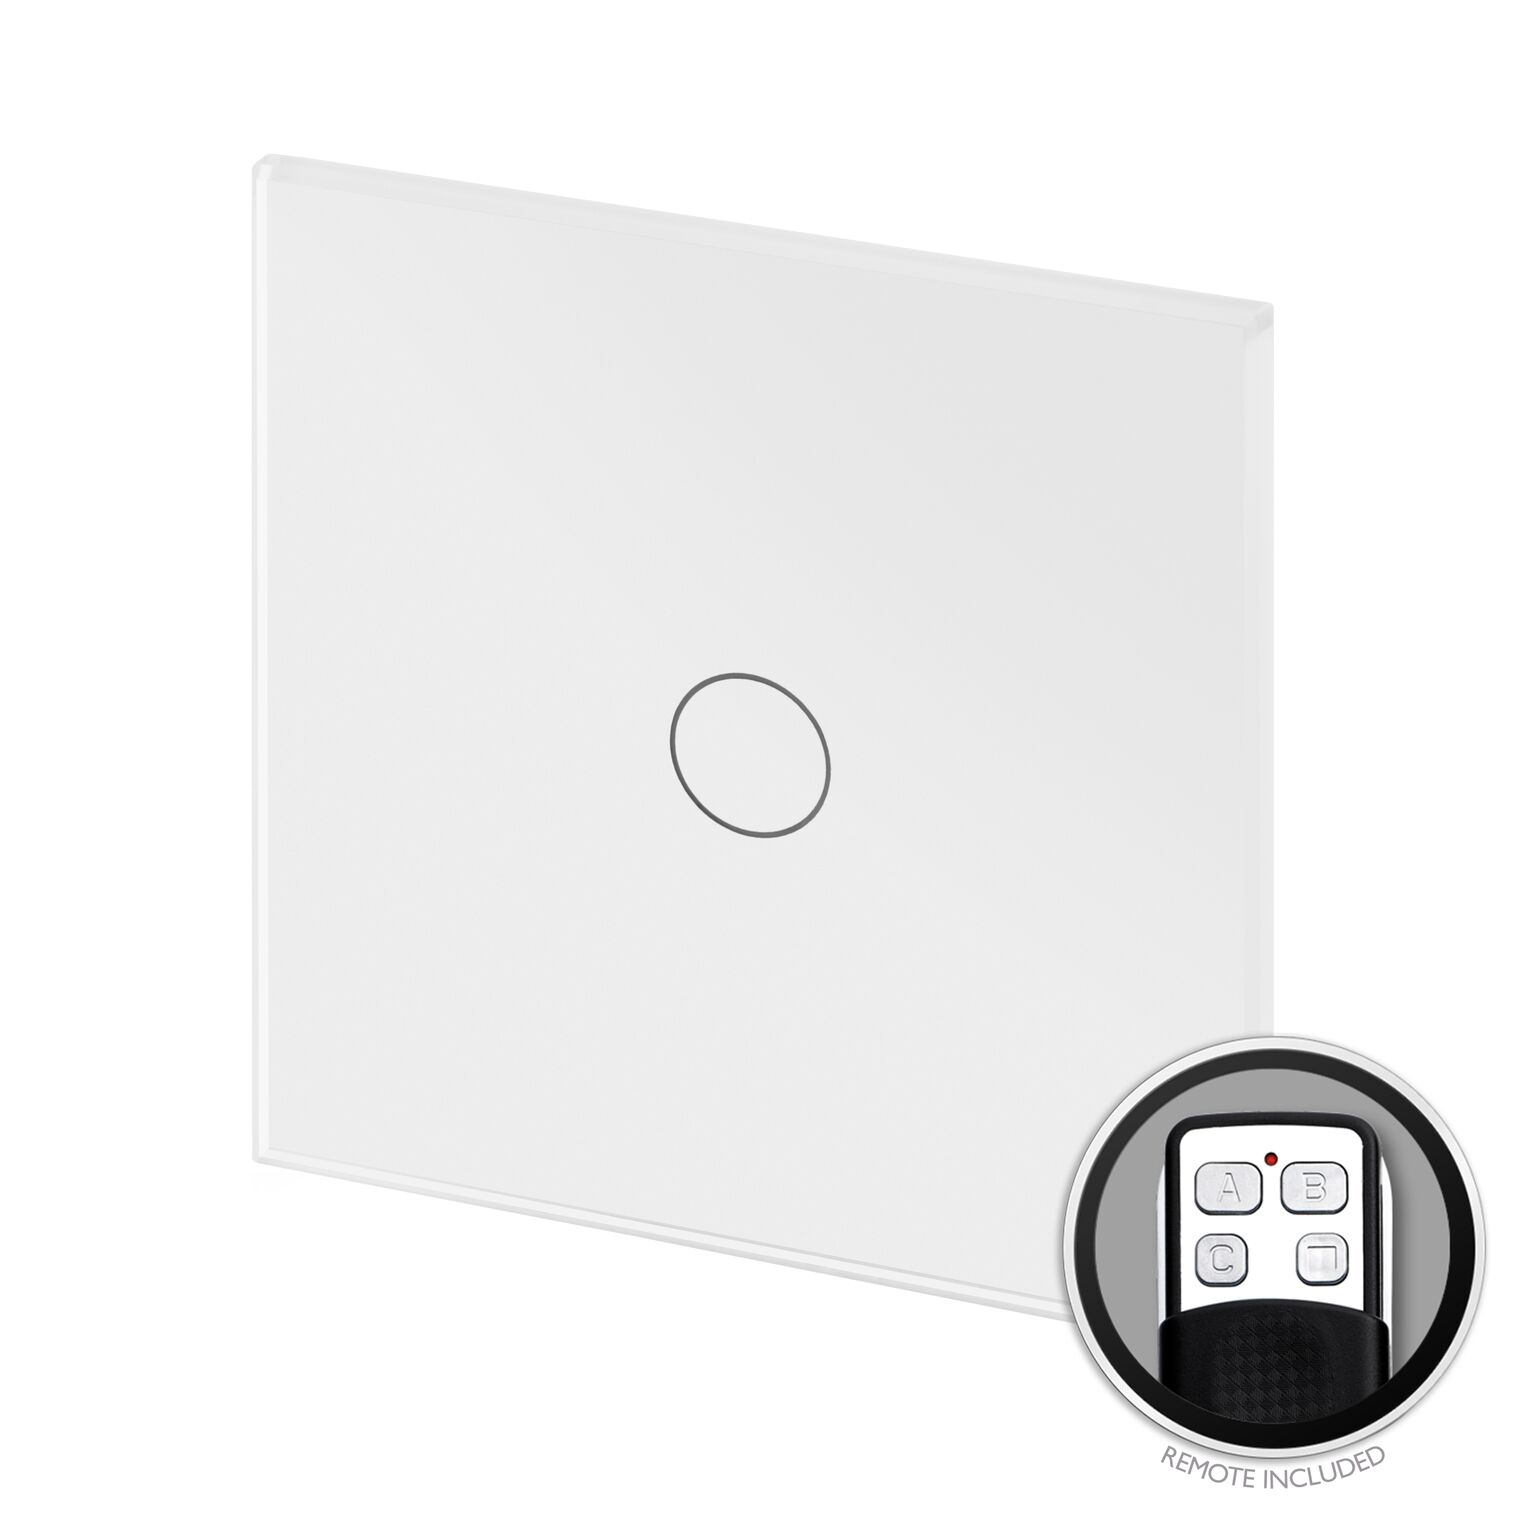 Crystal PG Touch & Remote Light Switch 1 Gang White